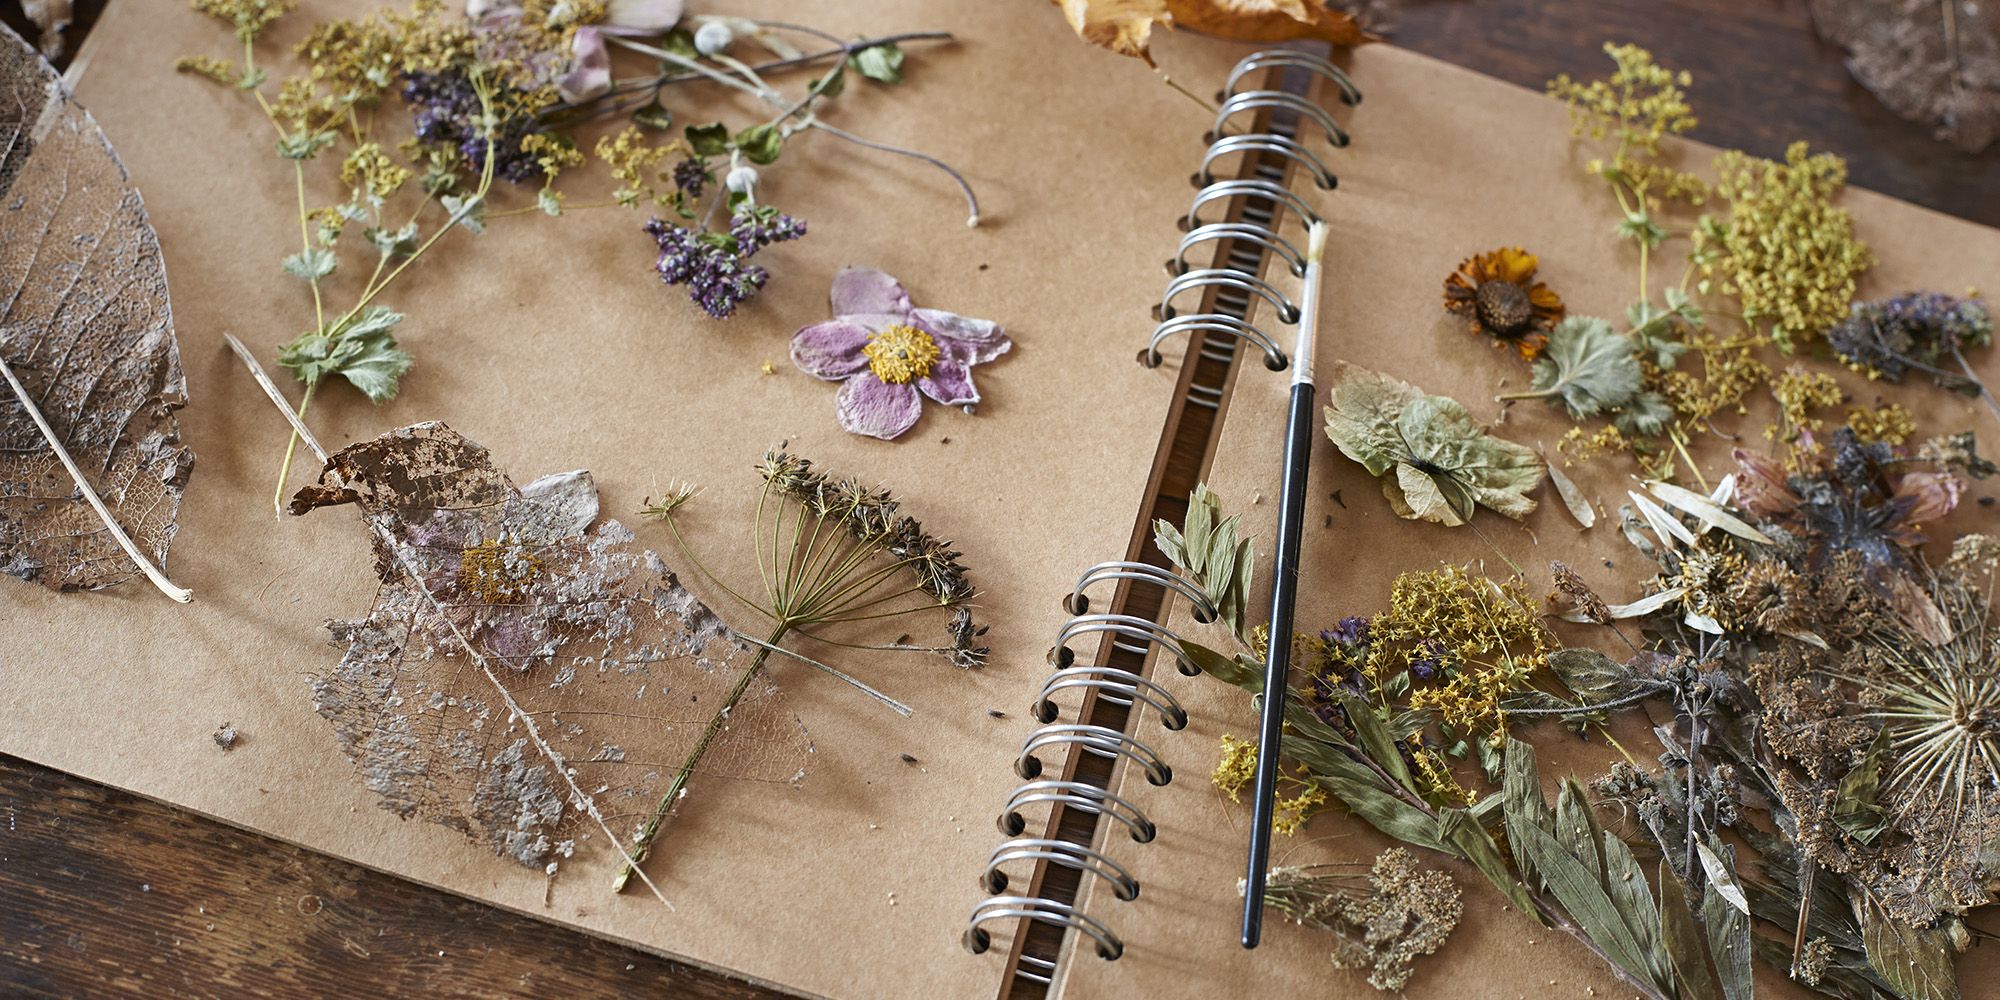 How To Press Flowers - Pressed Flower Craft Ideas